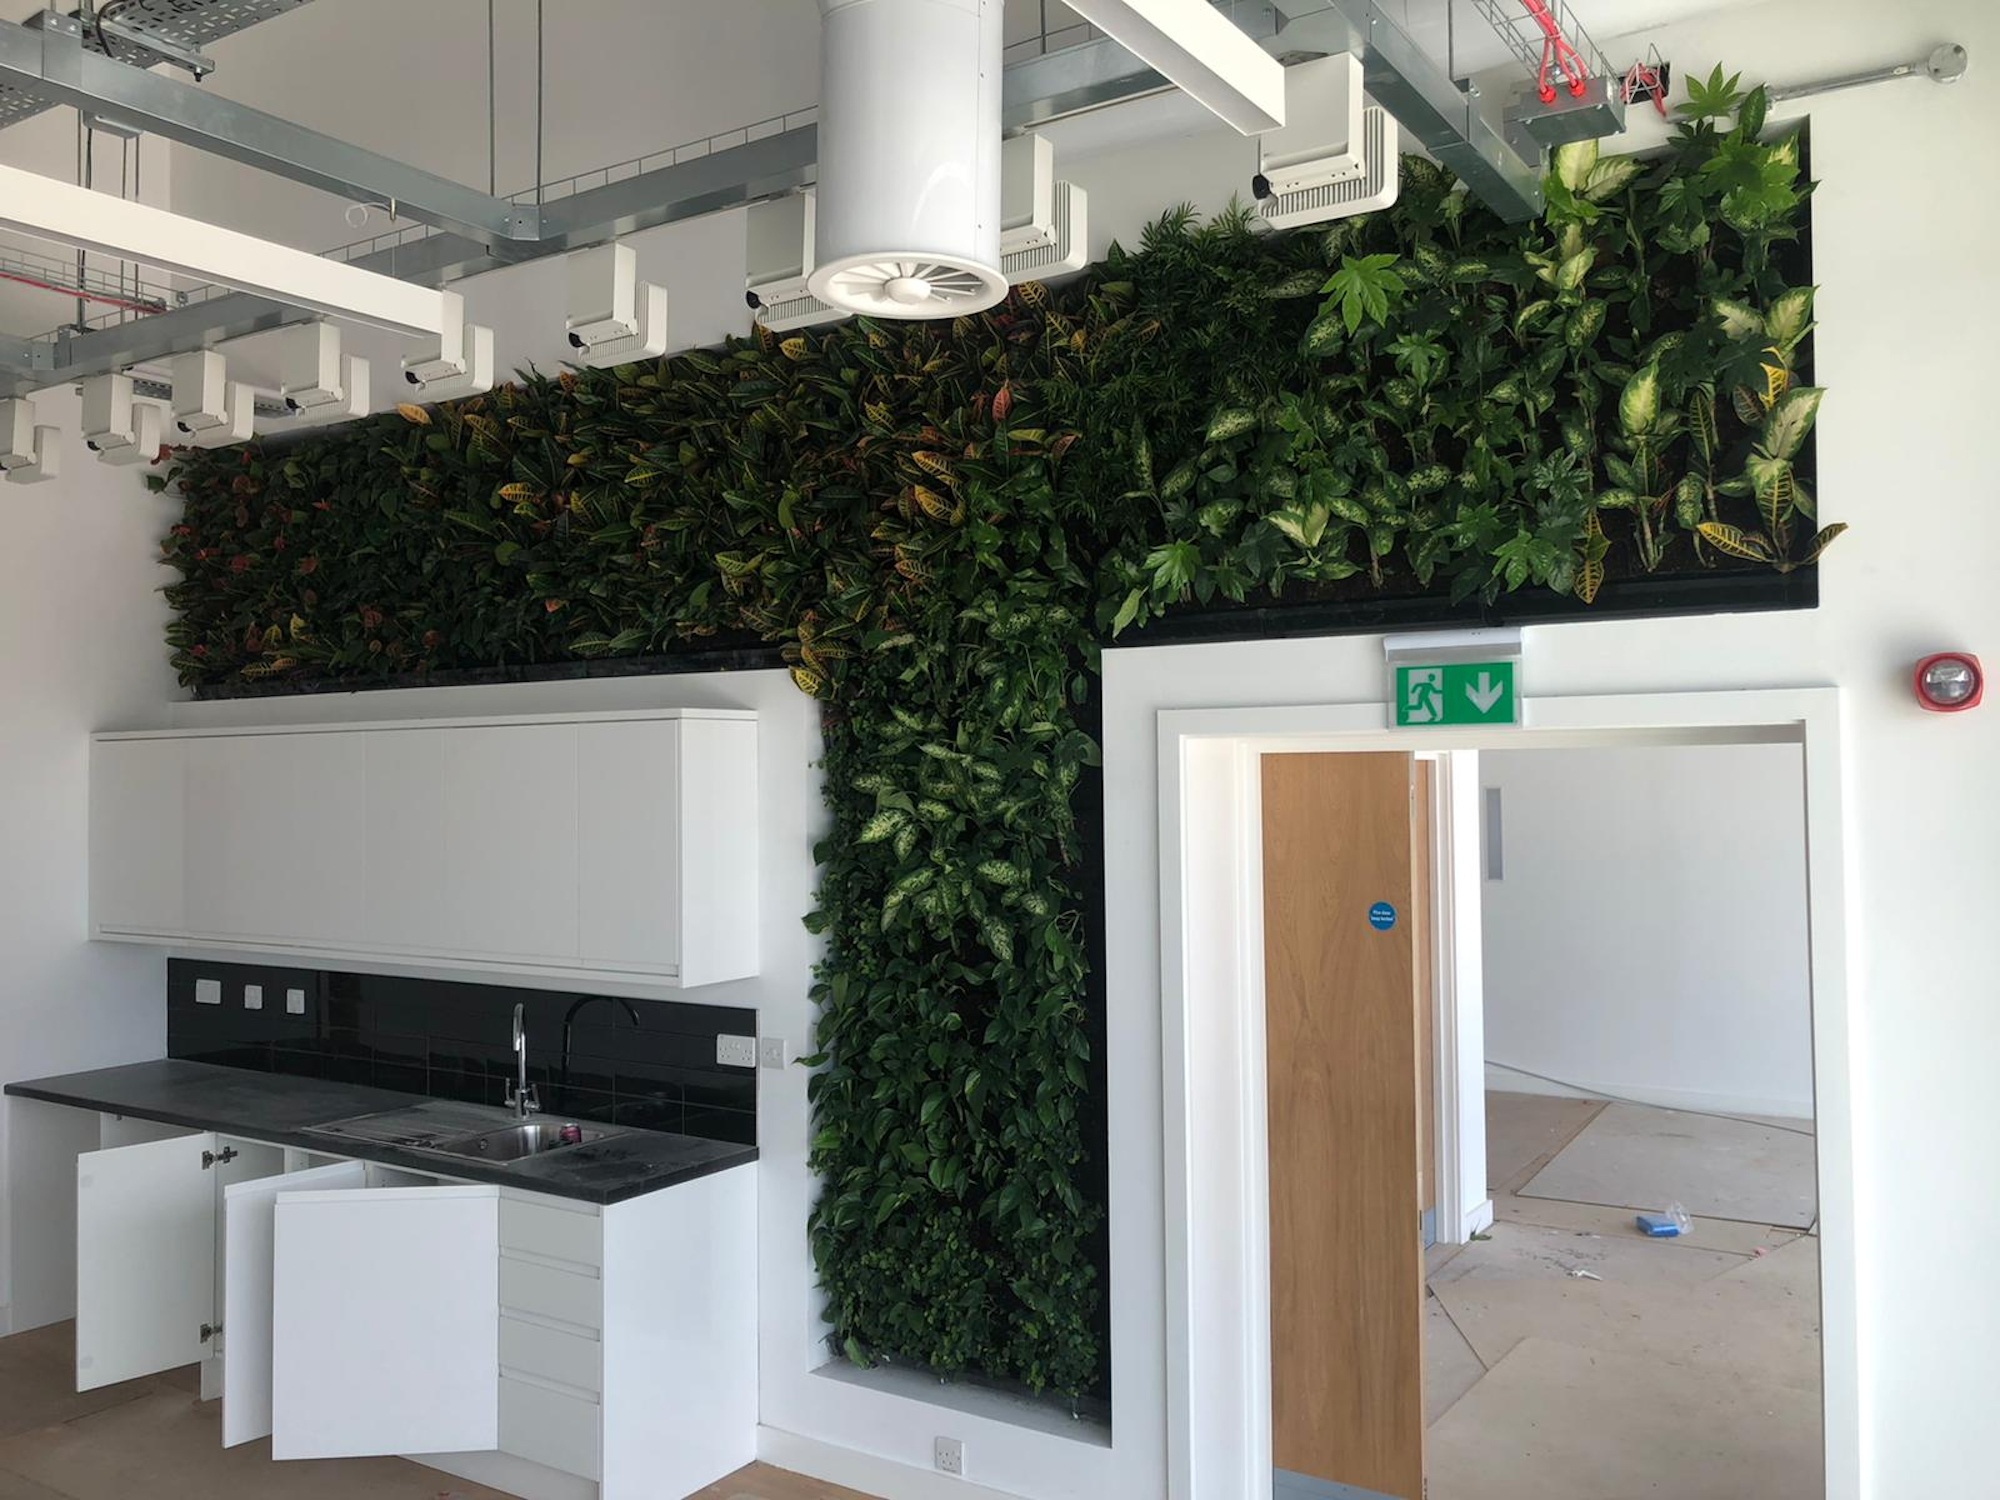 living wall as a backdrop to a kitchen area